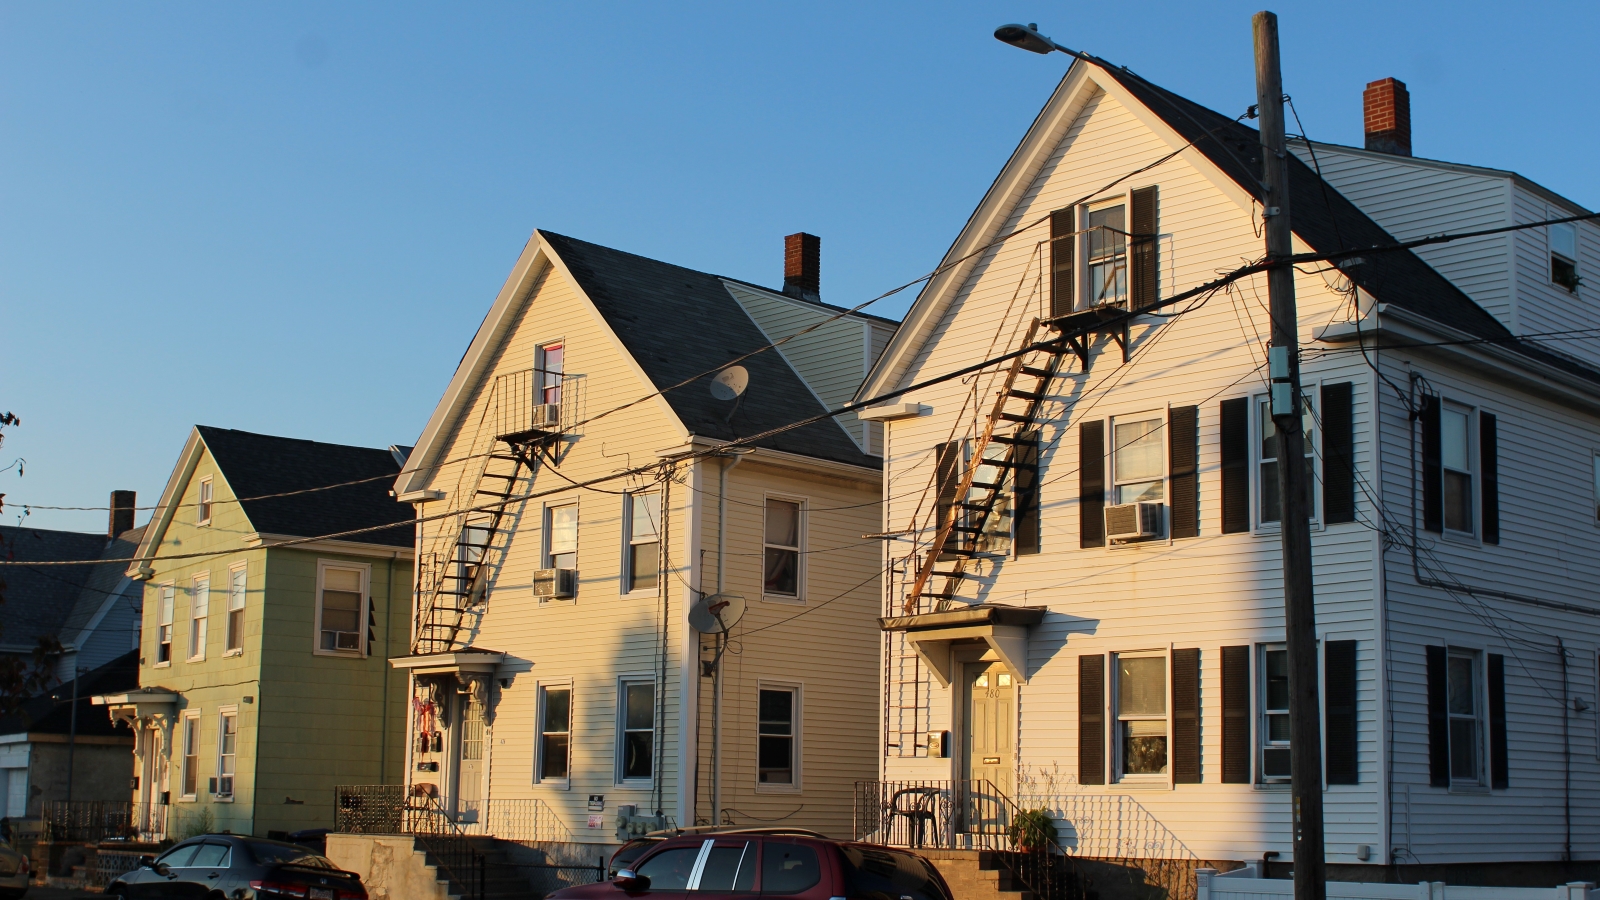 A row of apartment houses in New Bedford's South End.